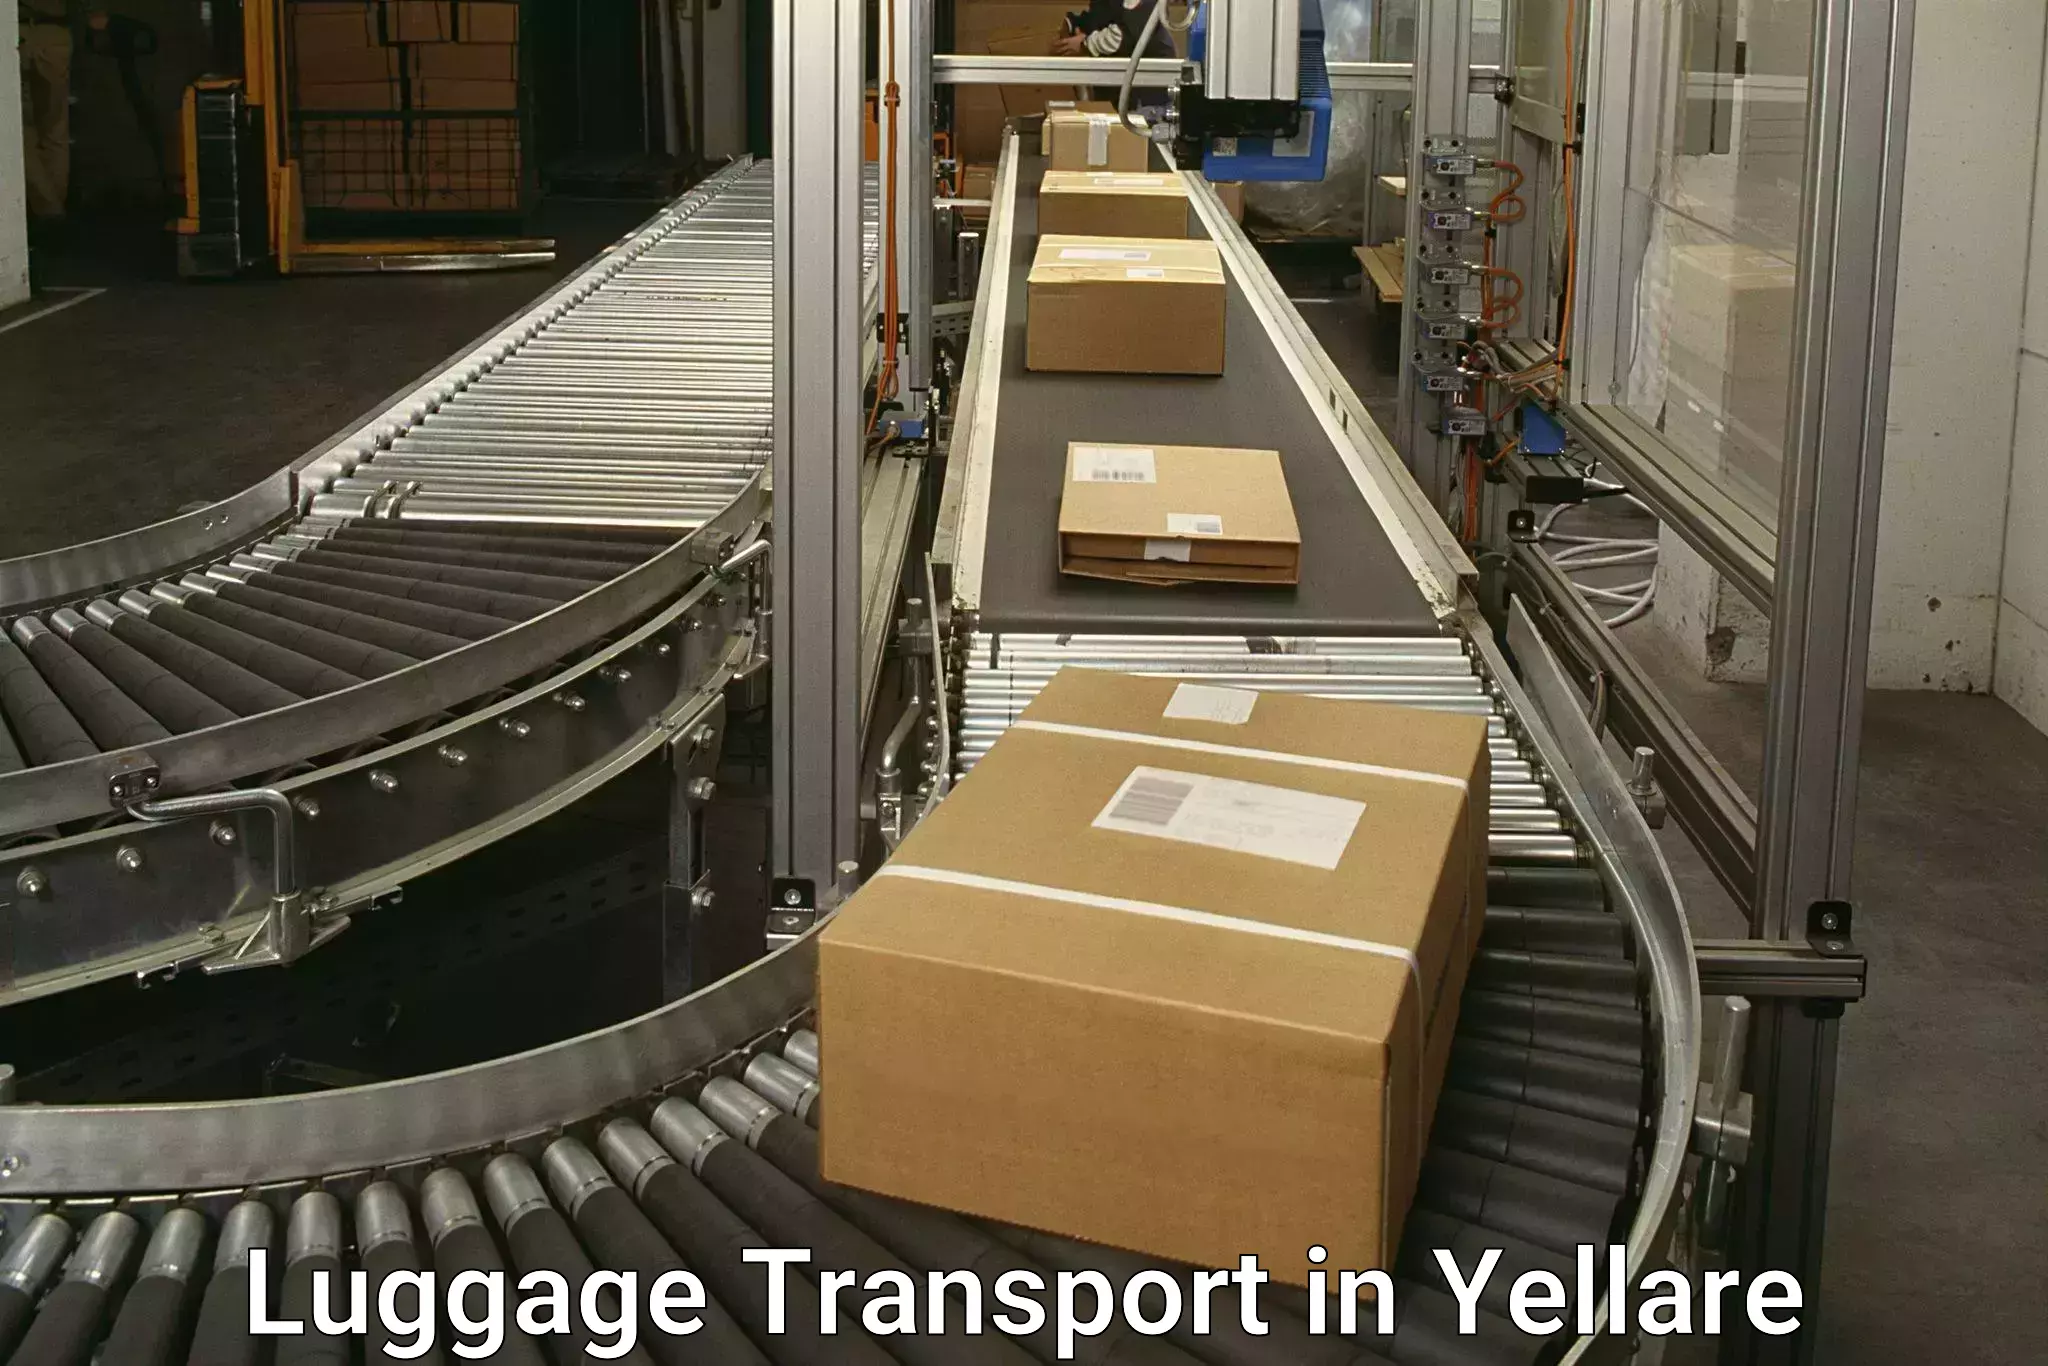 Luggage transport schedule in Yellare